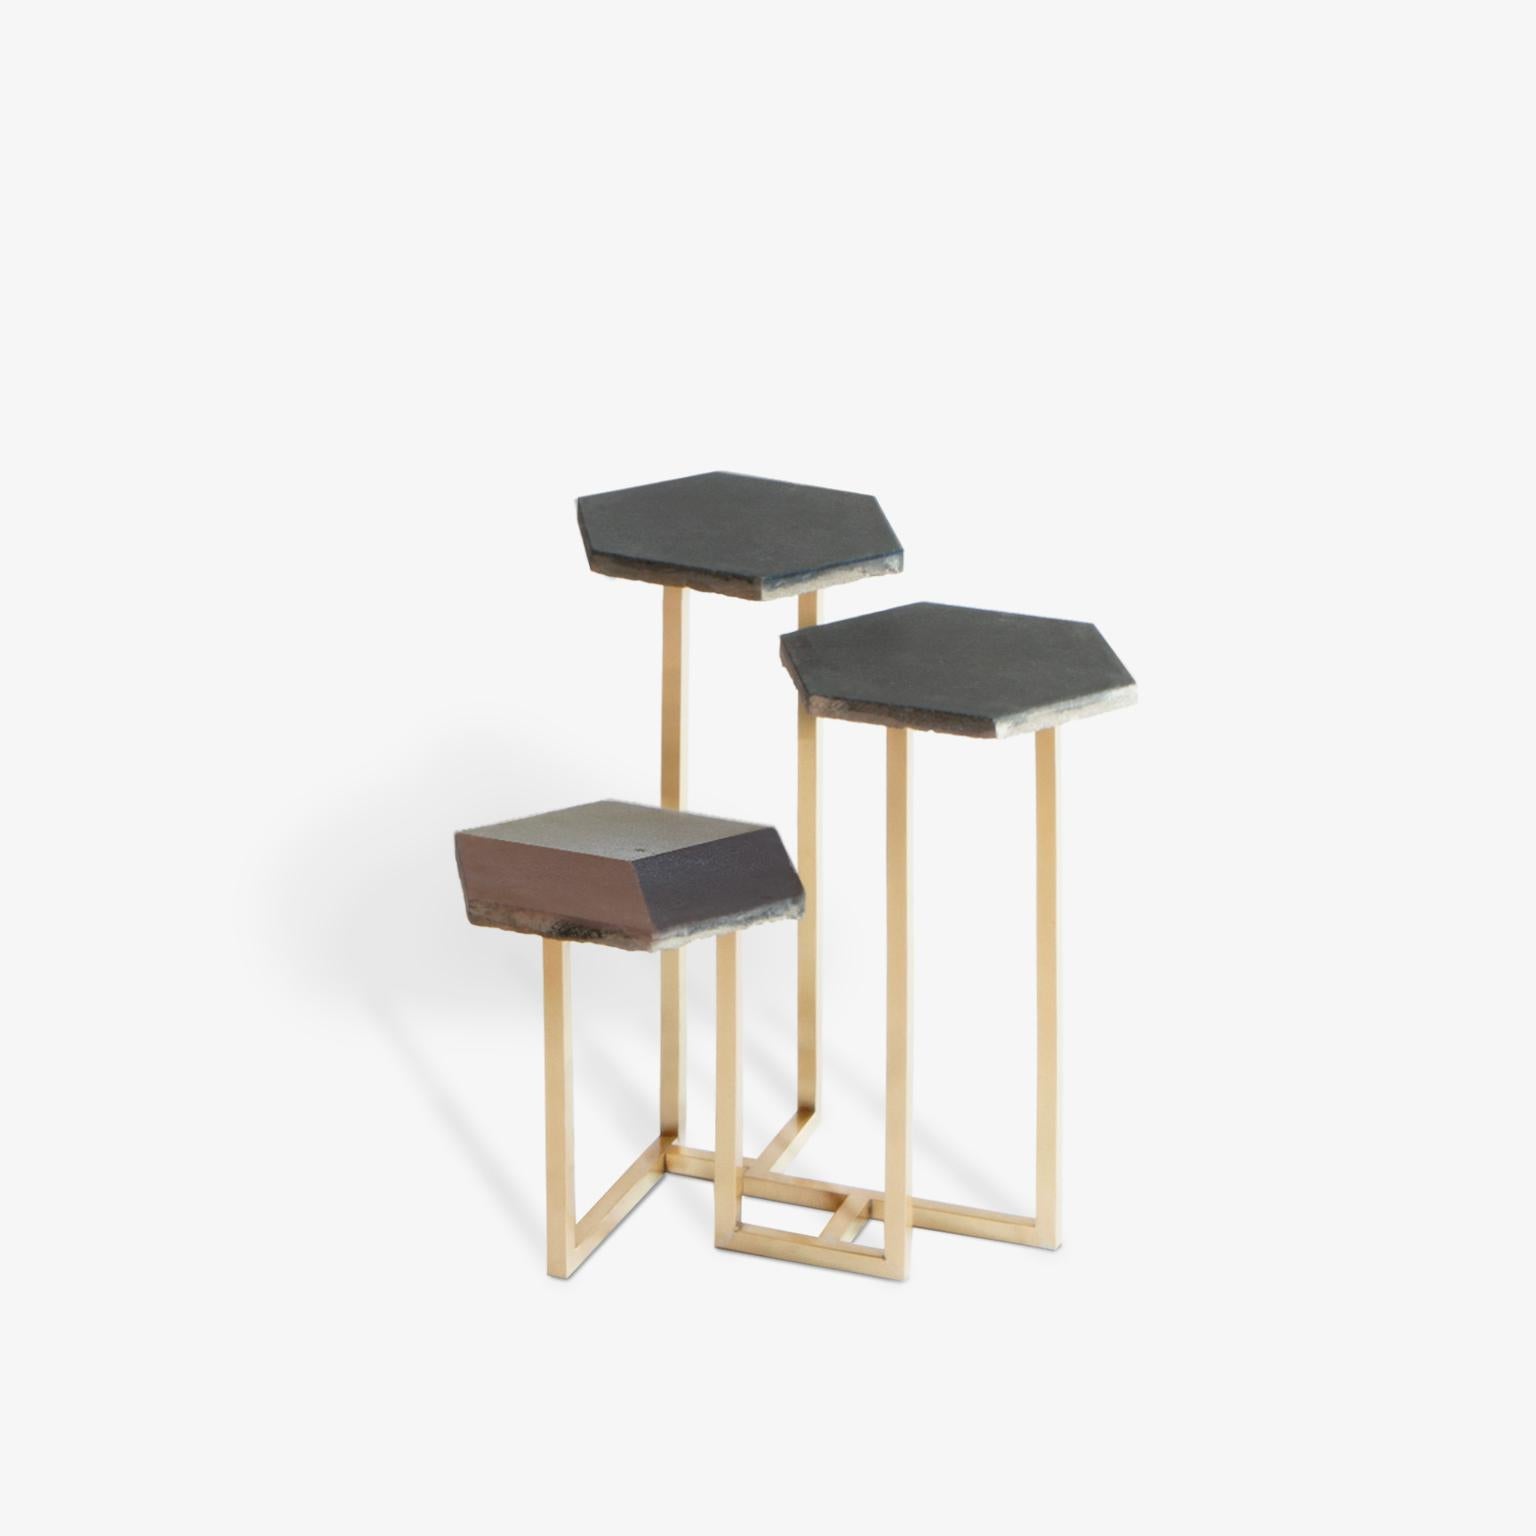 Italian 21st Century Petit Table de Milàn Side Table with Brass Base and Black Tiles